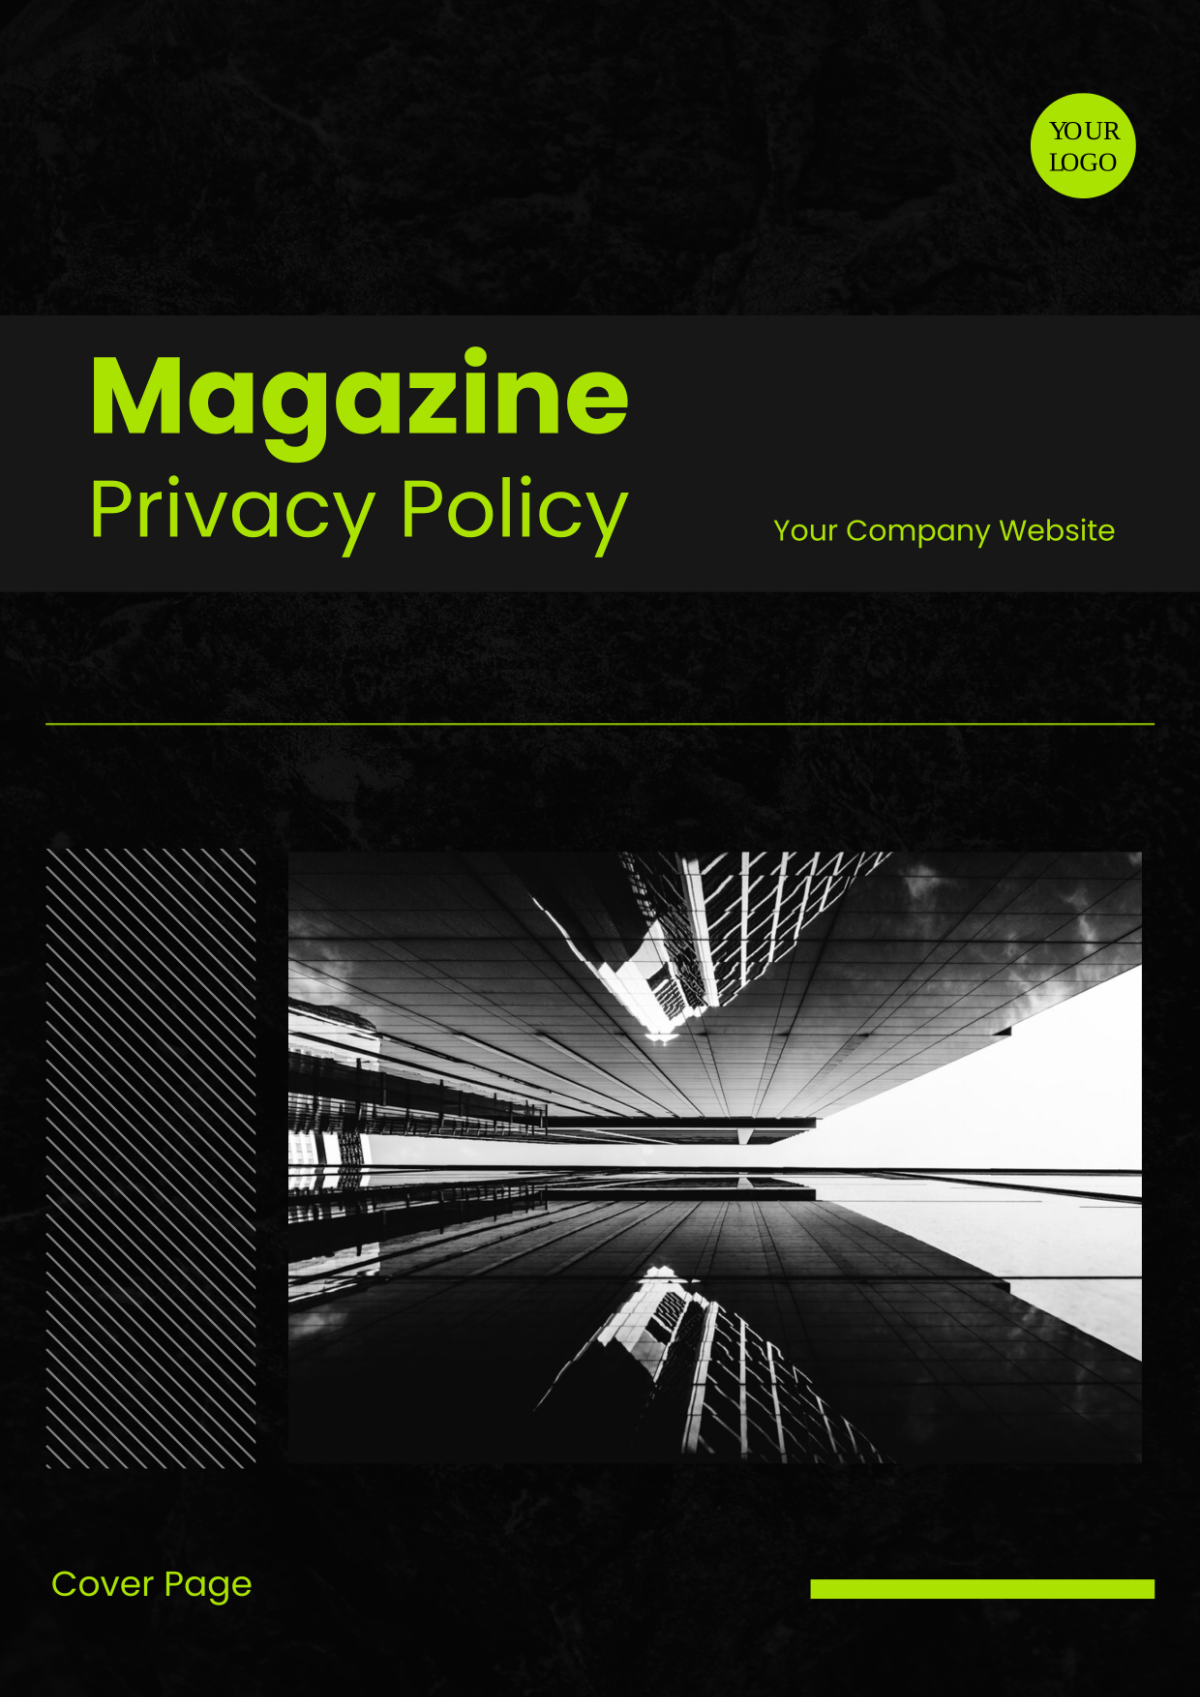 Magazine Privacy Policy Cover Page